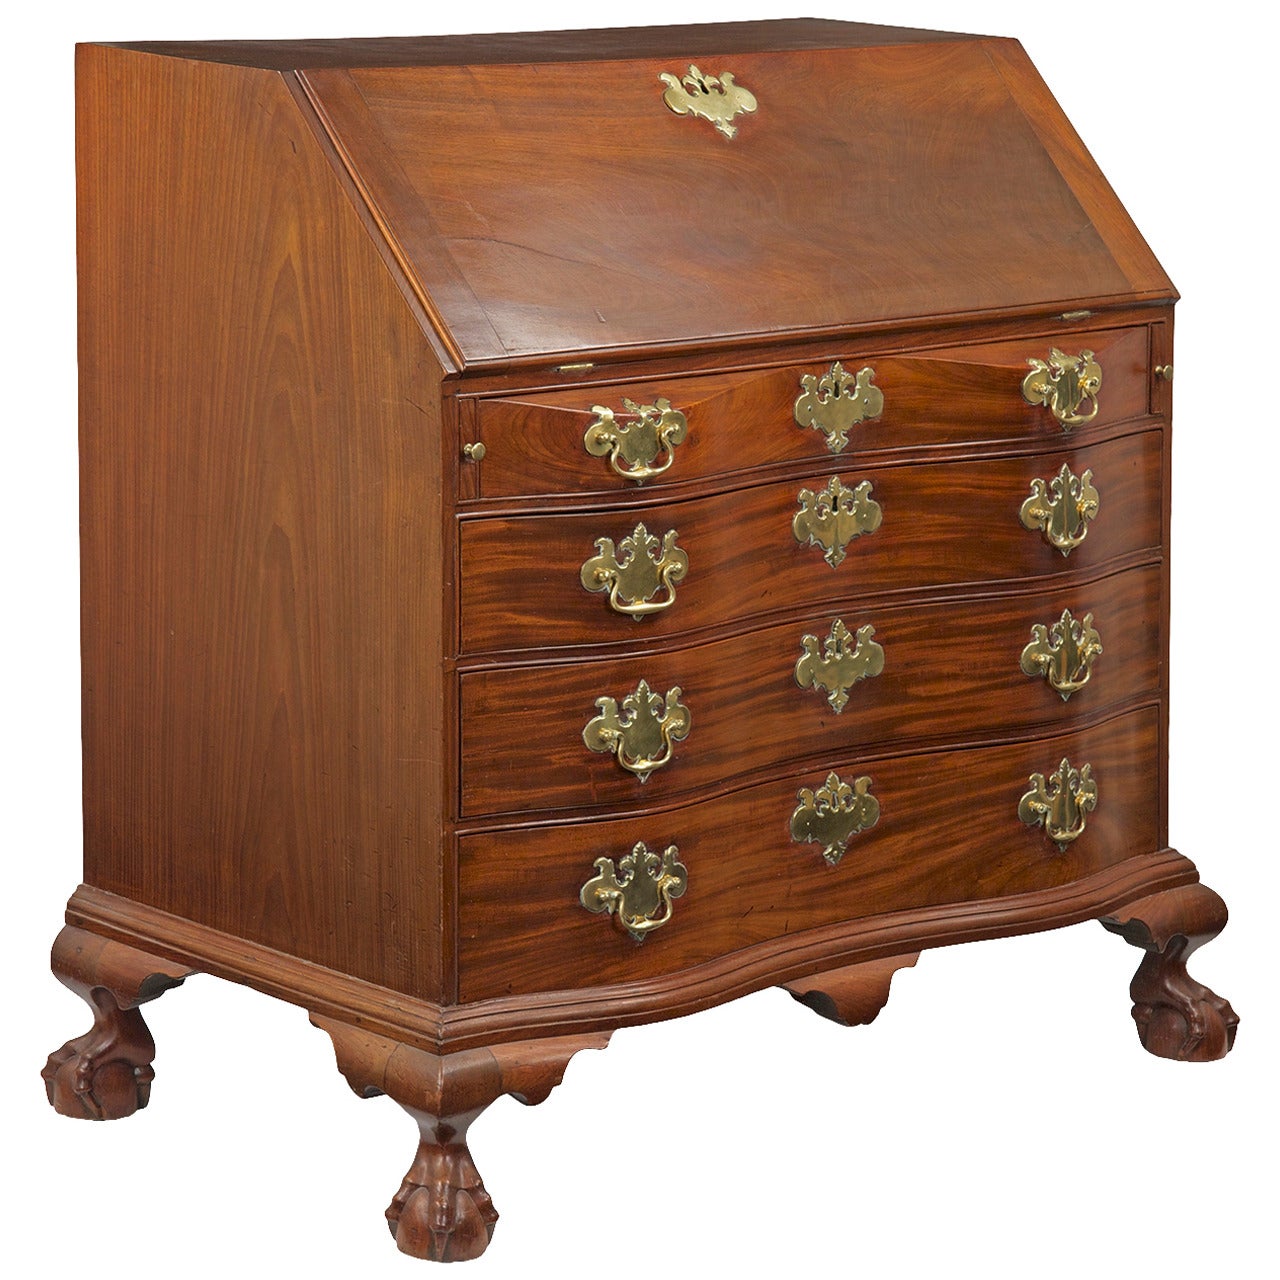 American Chippendale Oxbow Desk on Ball and Claw Feet, Boston c. 1760